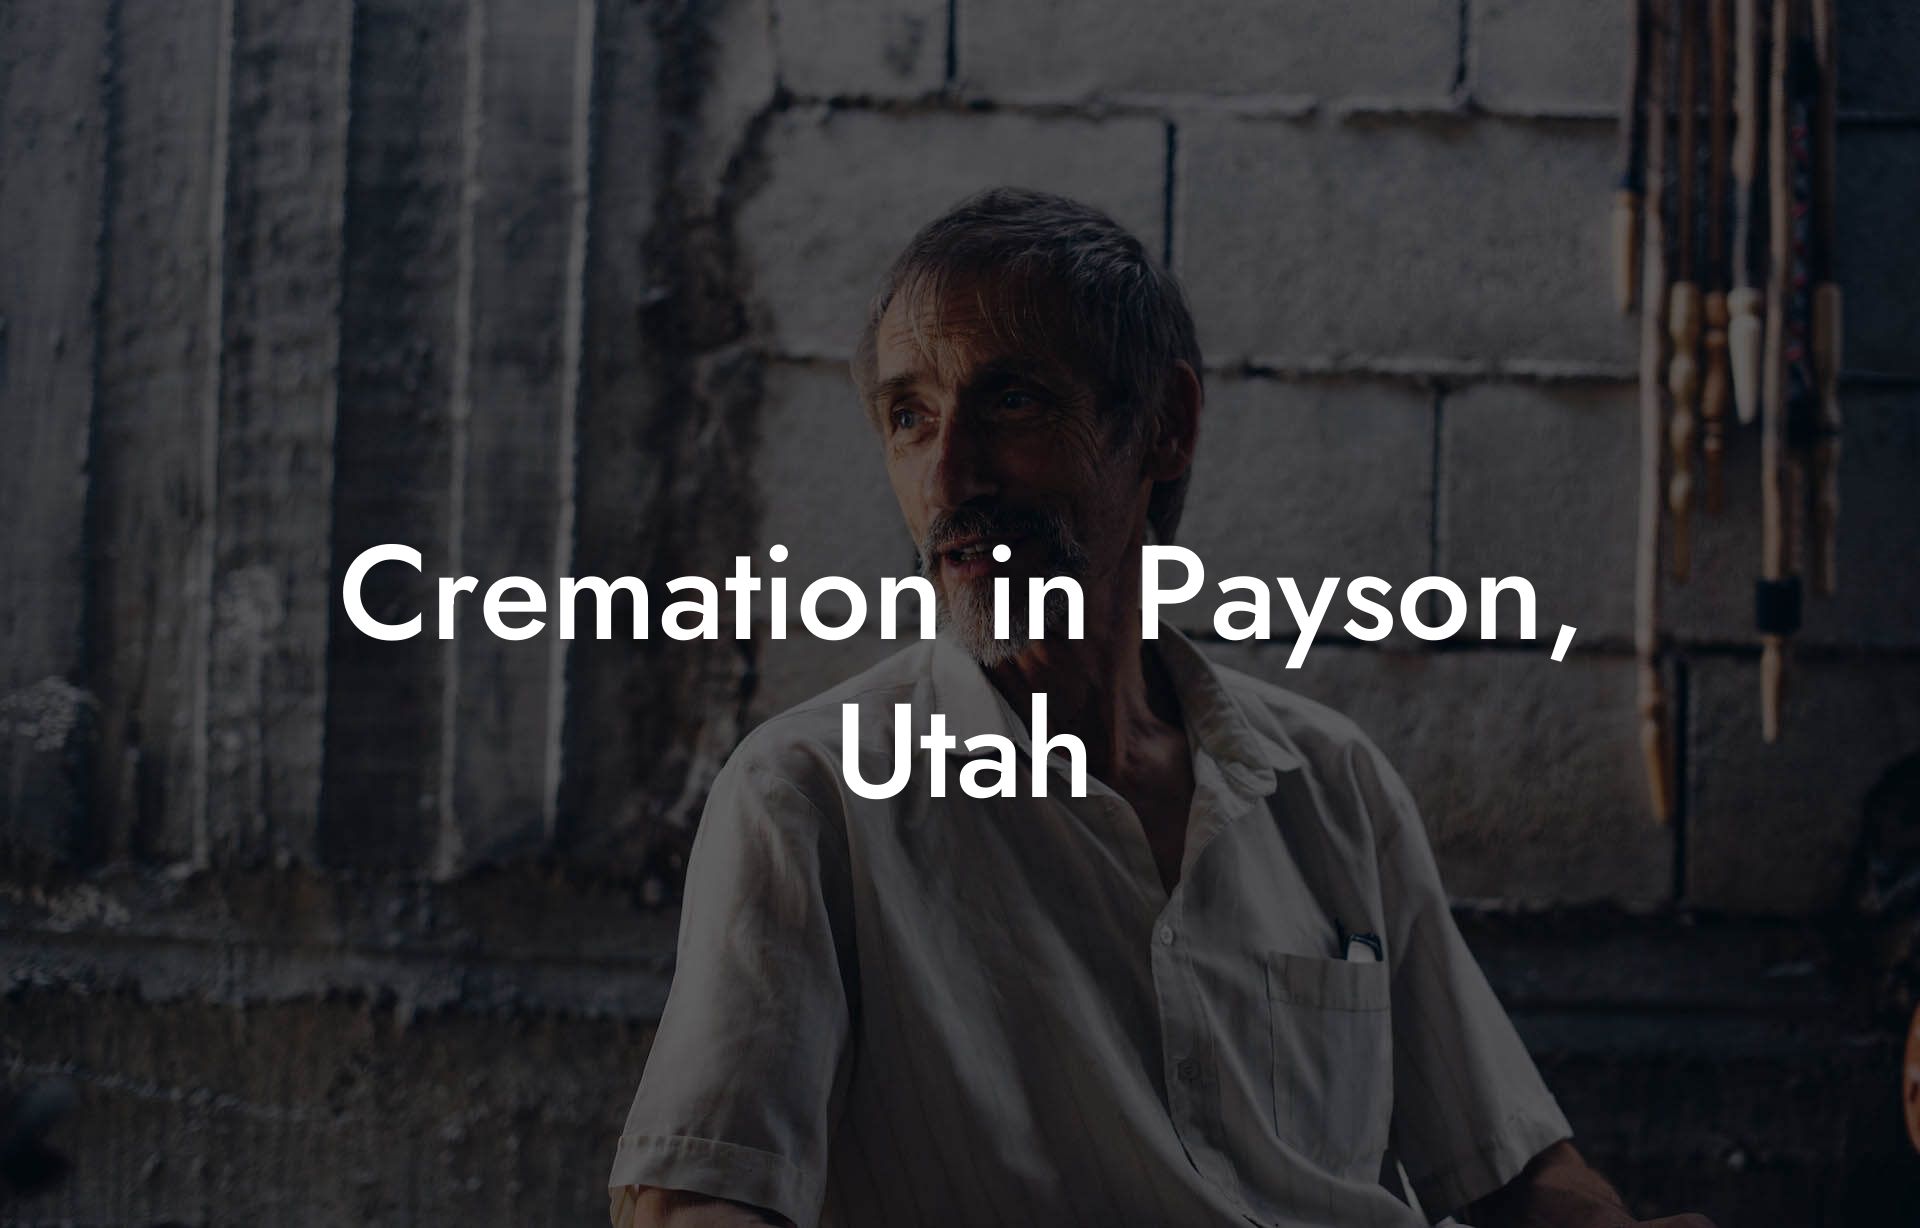 Cremation in Payson, Utah